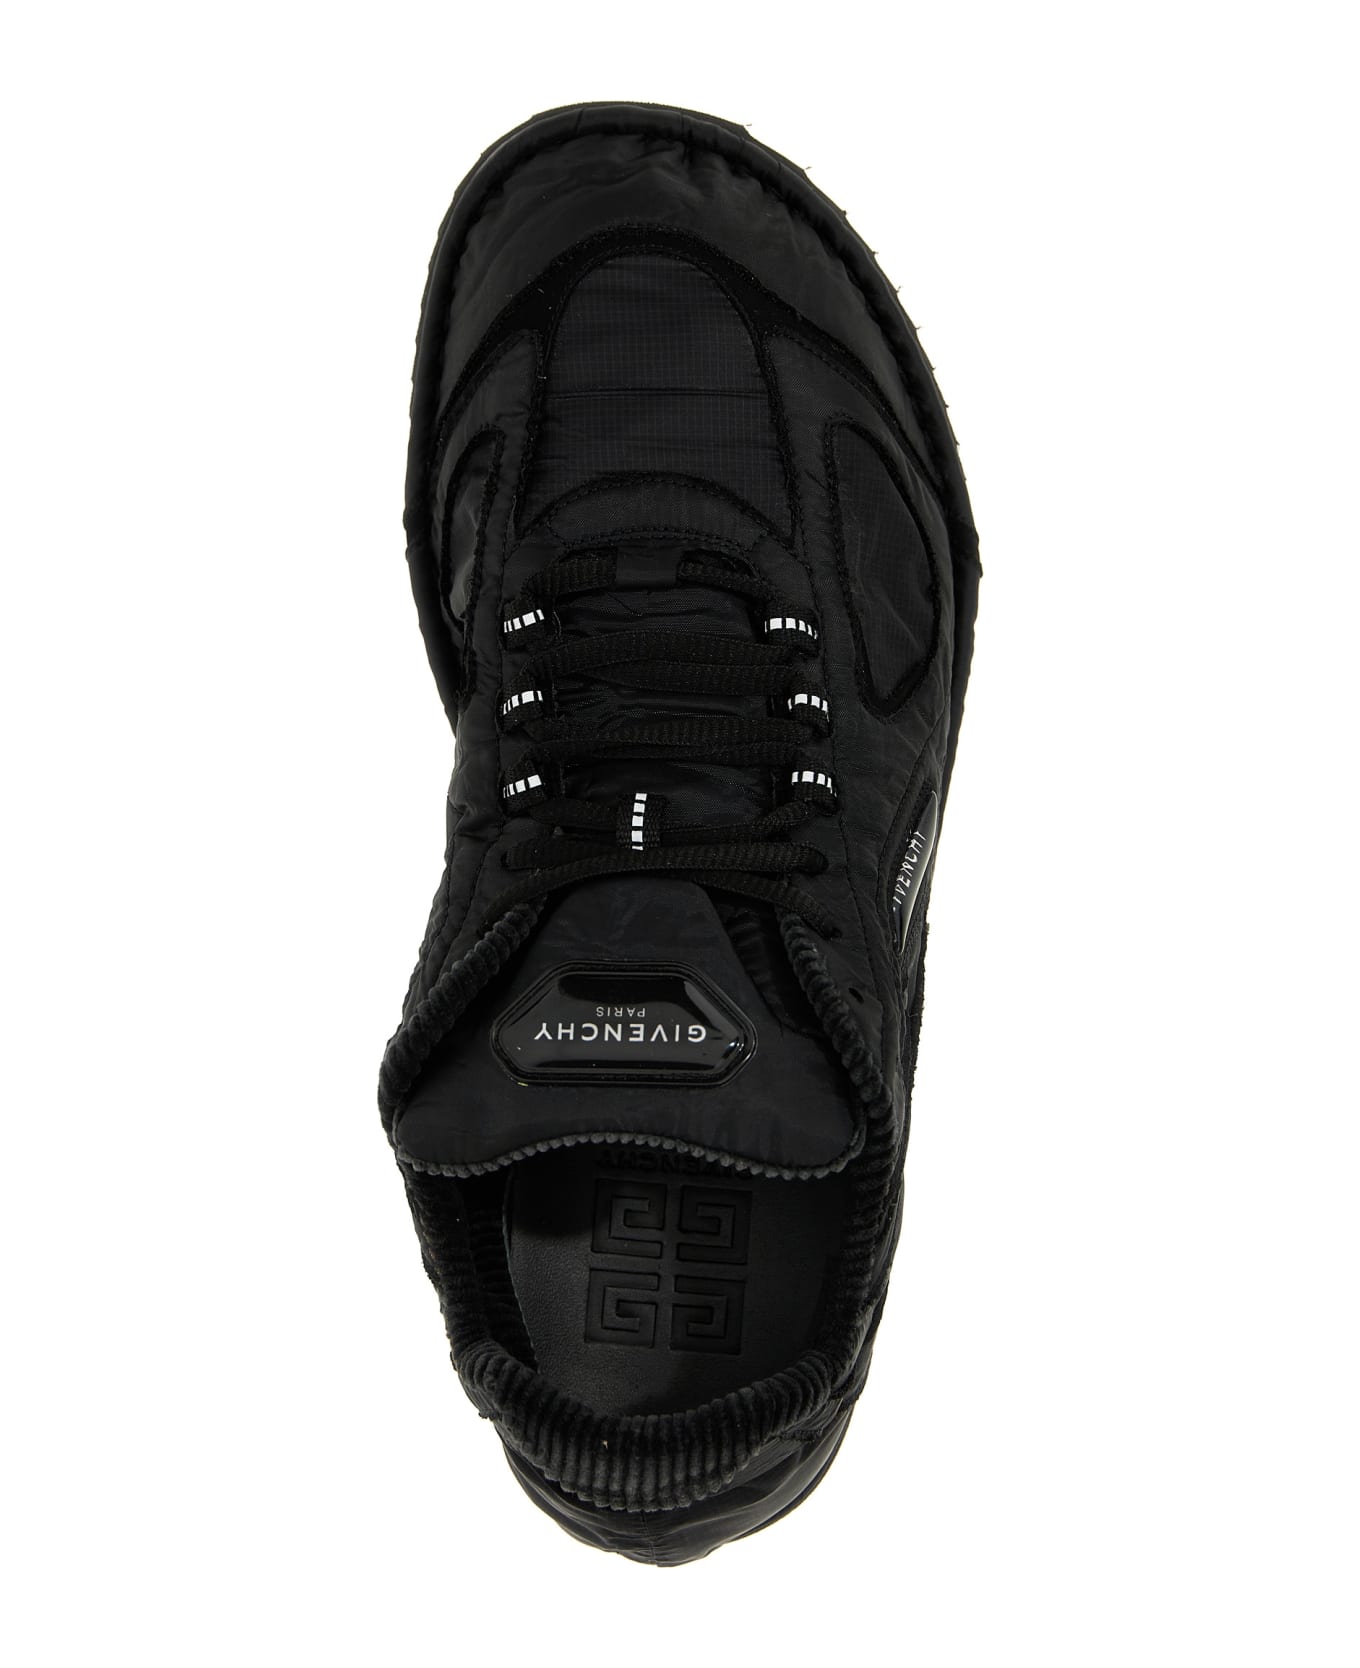 Givenchy 'flat' Sneakers - Black  